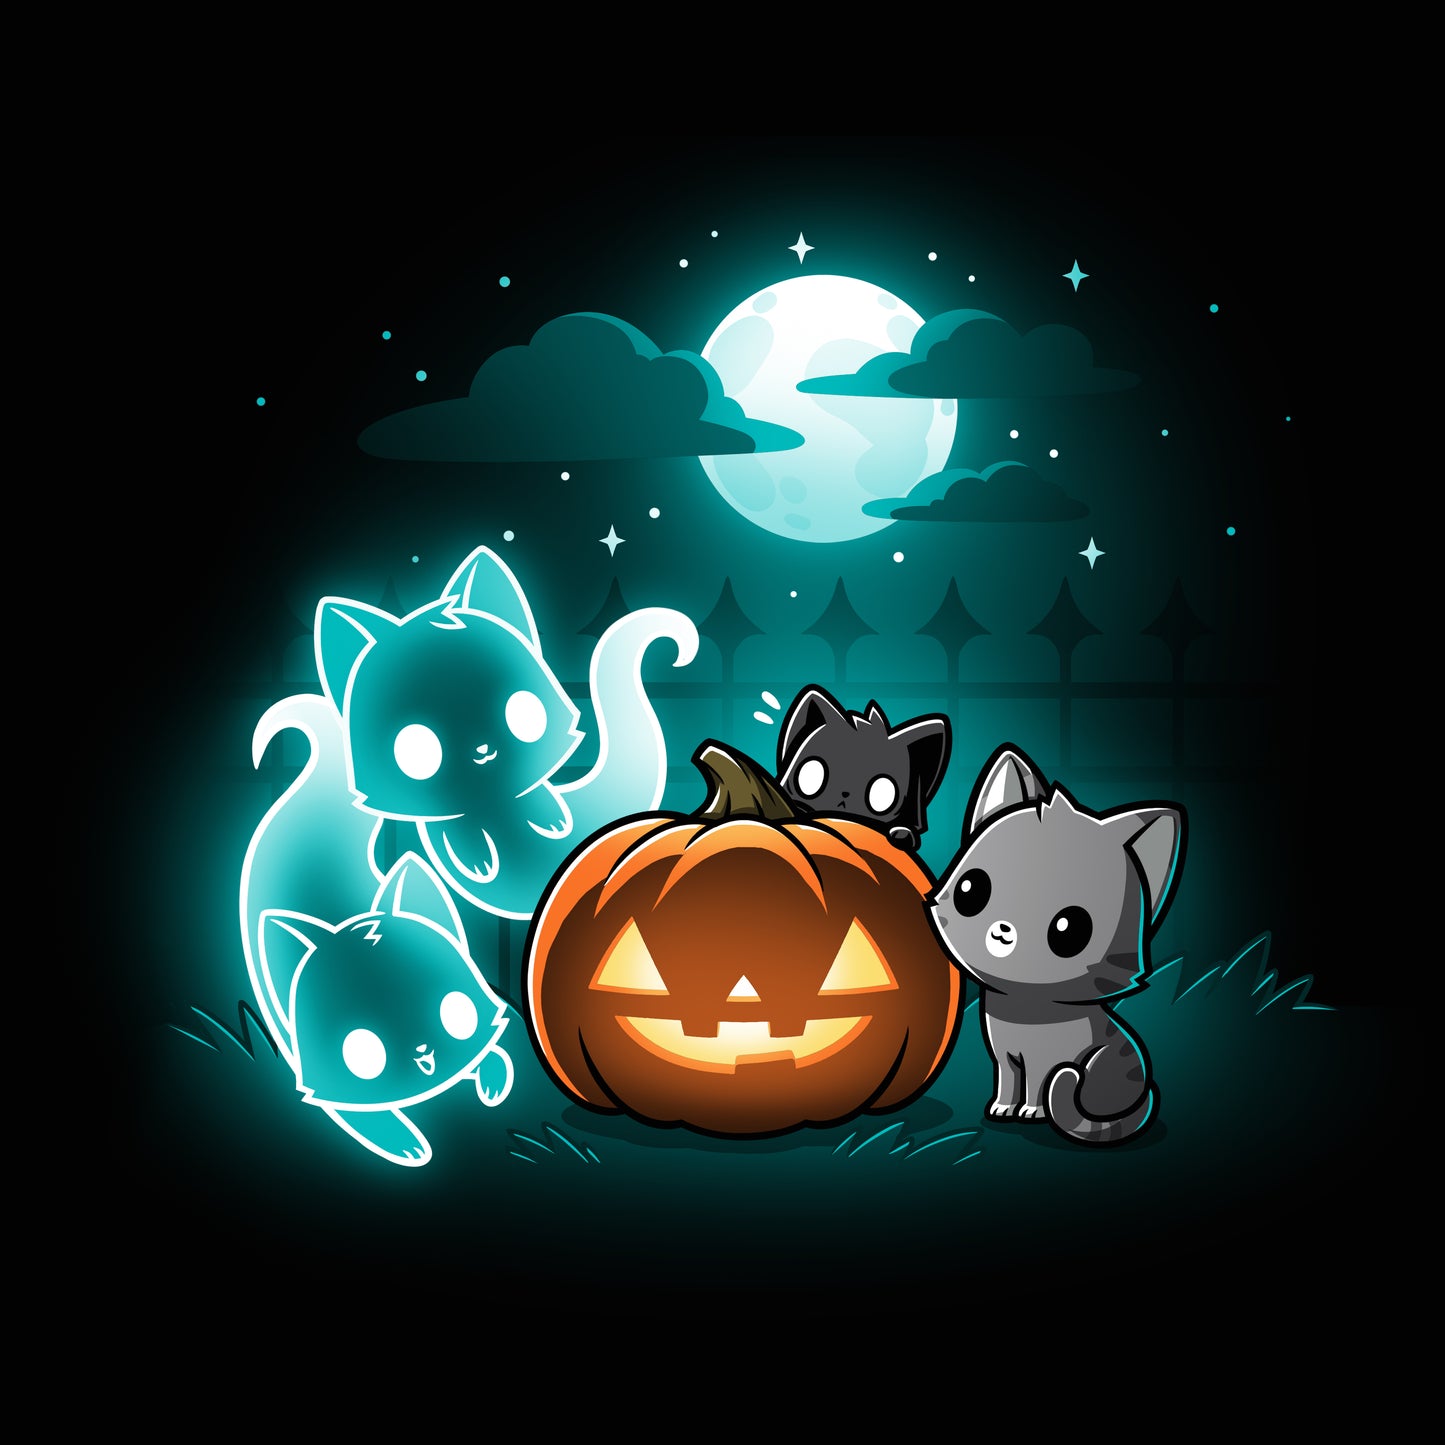 A Spurrits of Halloween t-shirt featuring a Halloween cat and a jack-o-lantern, by TeeTurtle.